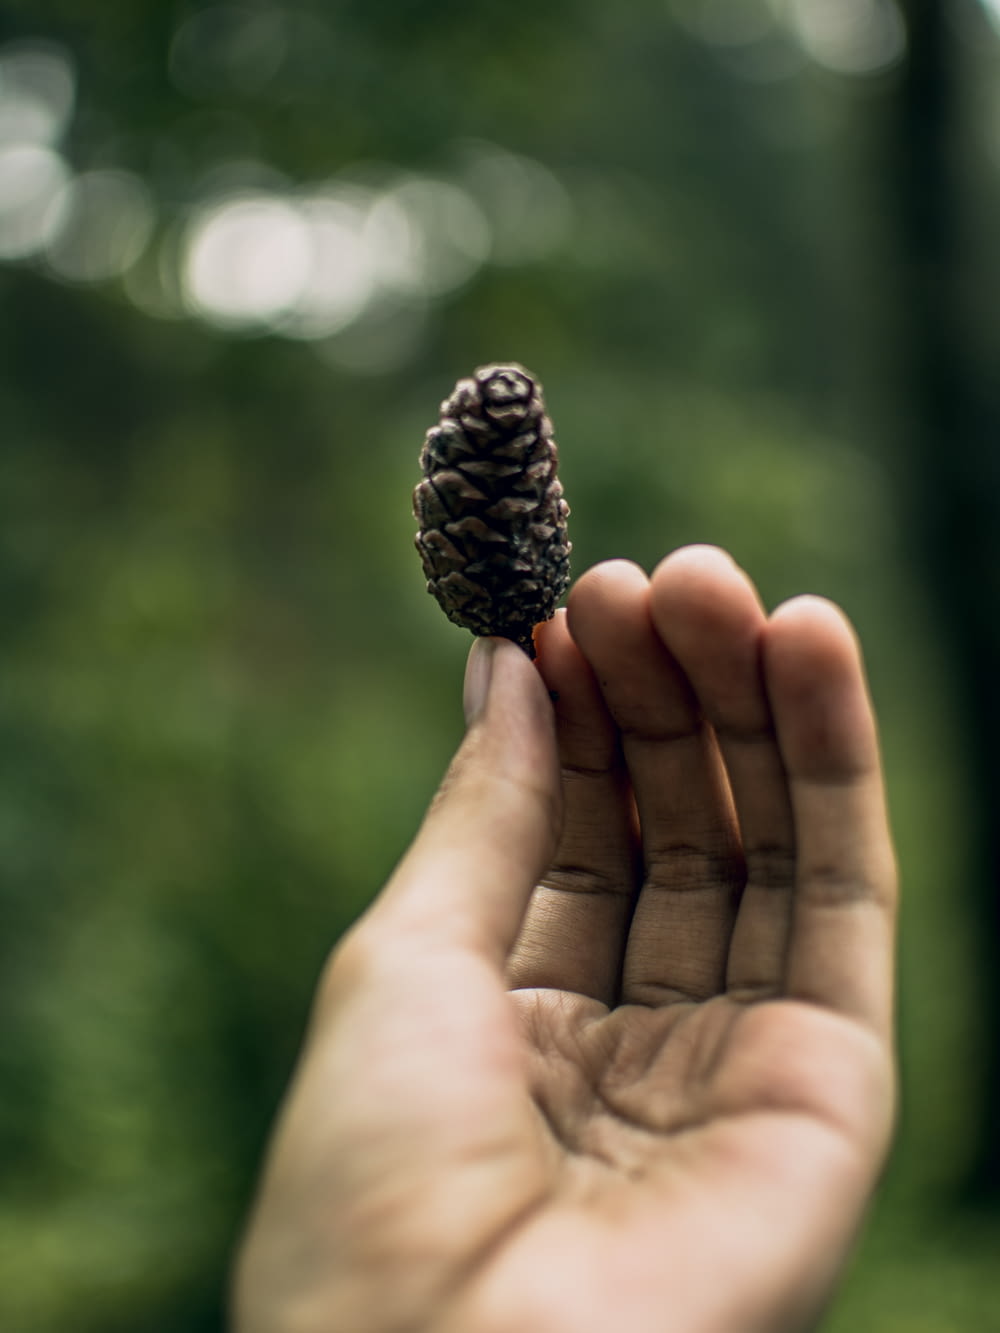 tilt shift photography of a person showing a pinecone